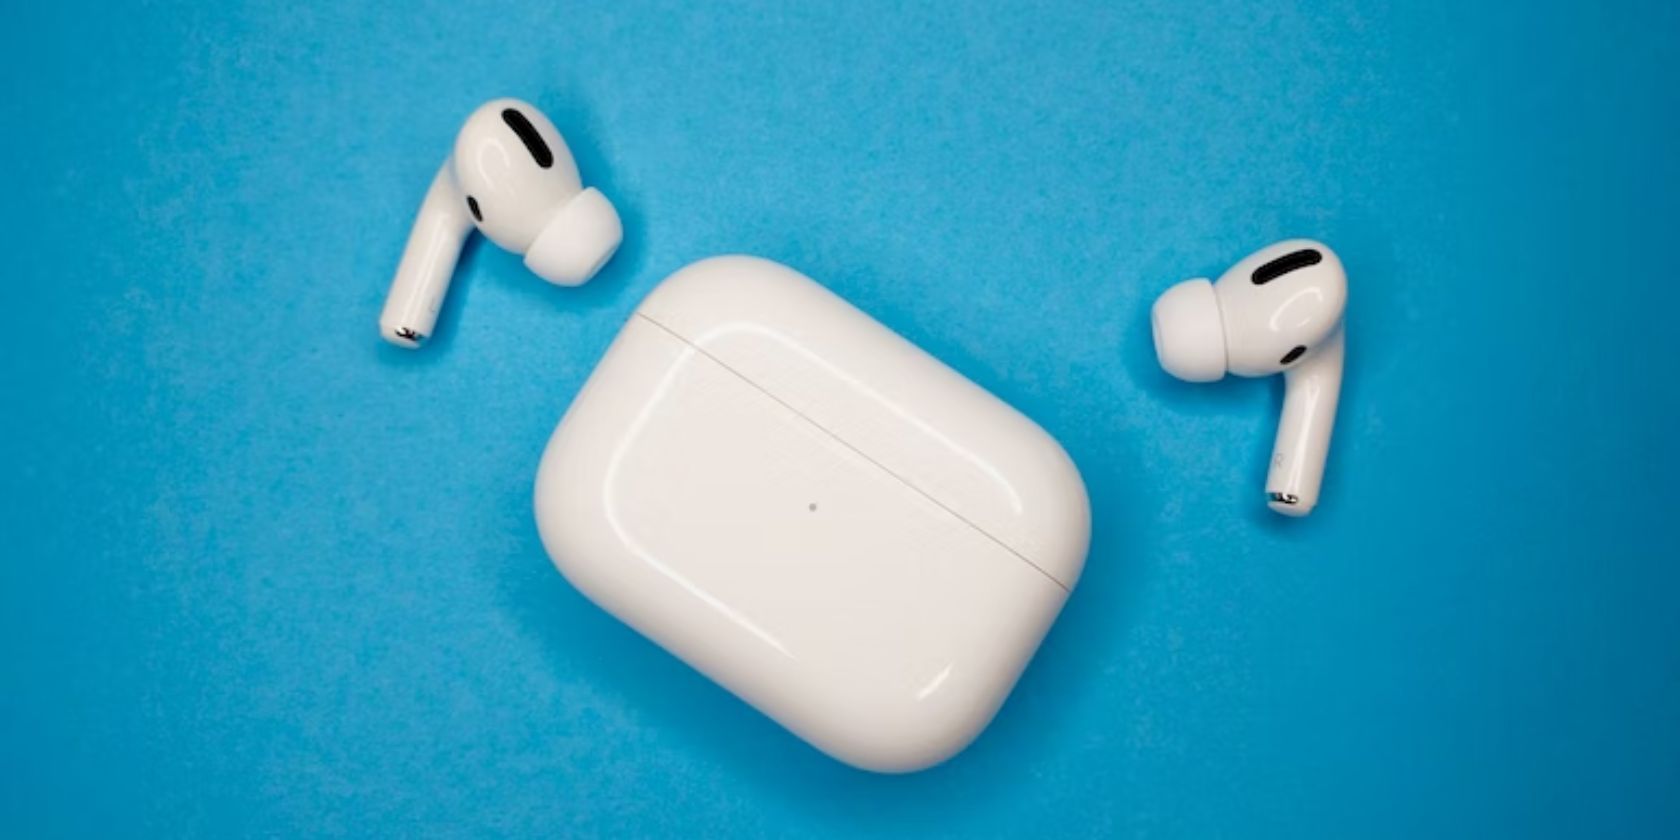 airpods pro and case against blue background